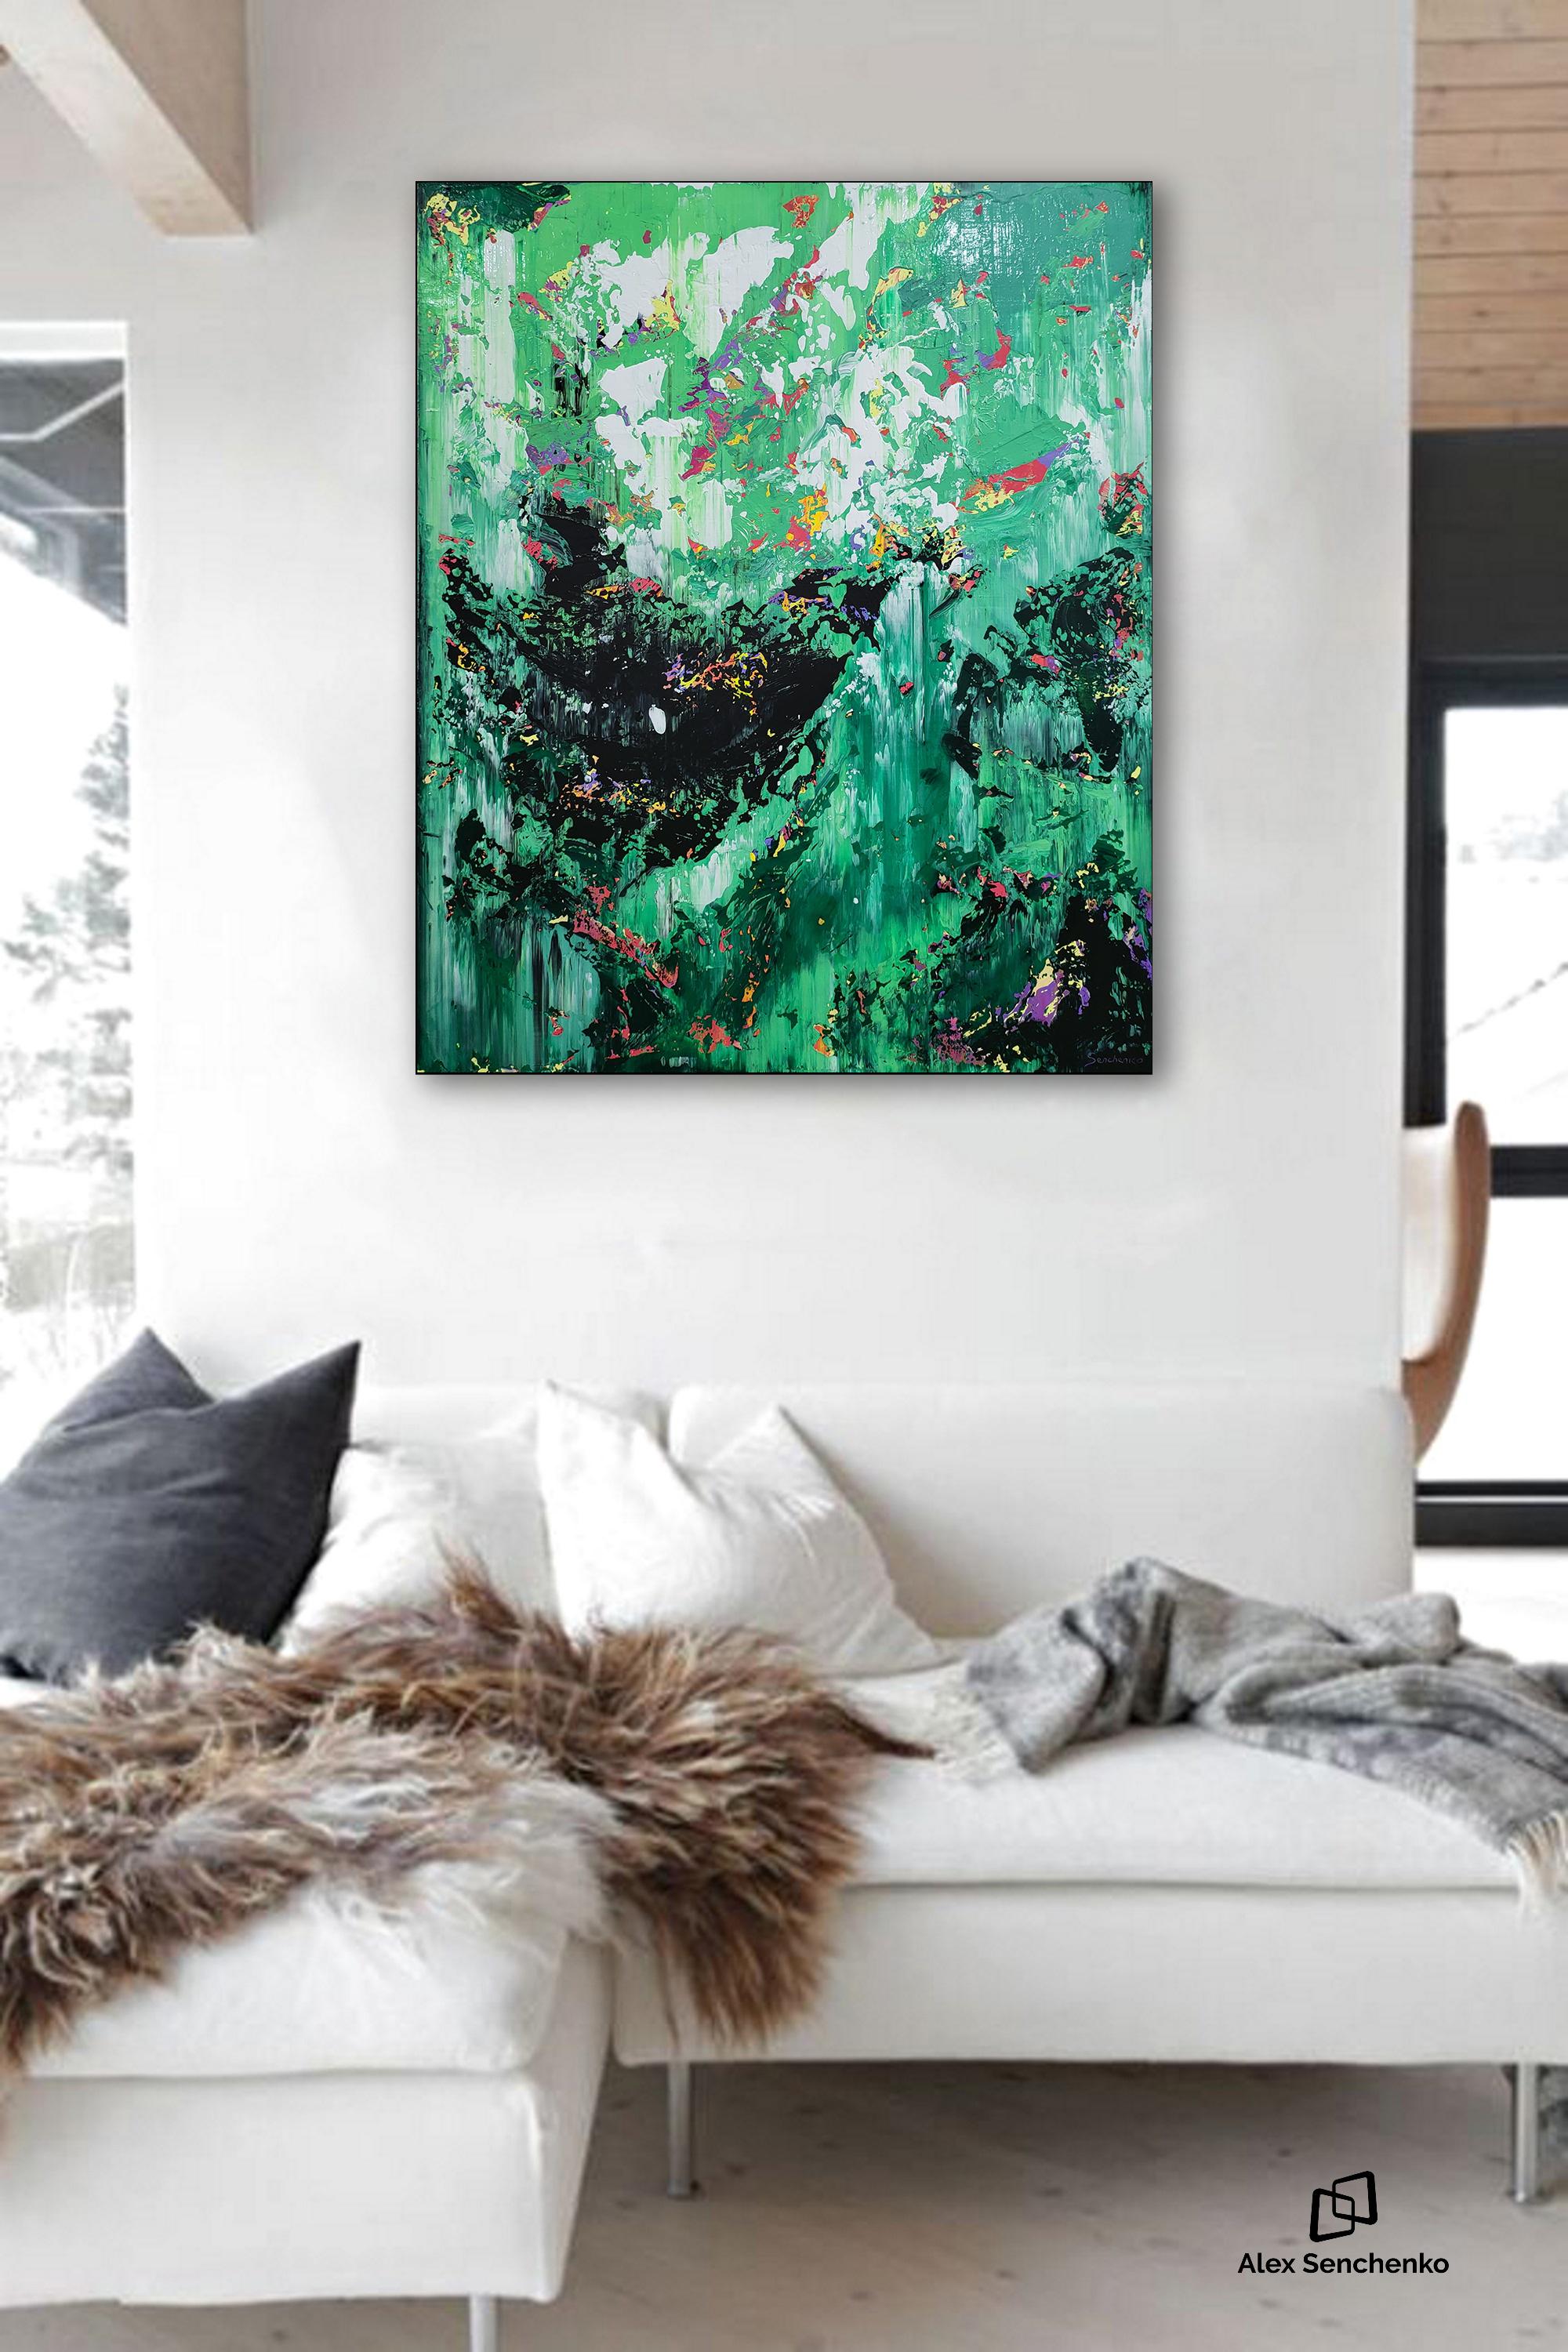 There’s something different about the homes of creative people. They like to surround themselves with inspiring things, from unique tablecloths to the incredible paintings on the walls.
Alex Senchenko’s - Abstract 2353 - can give your home that